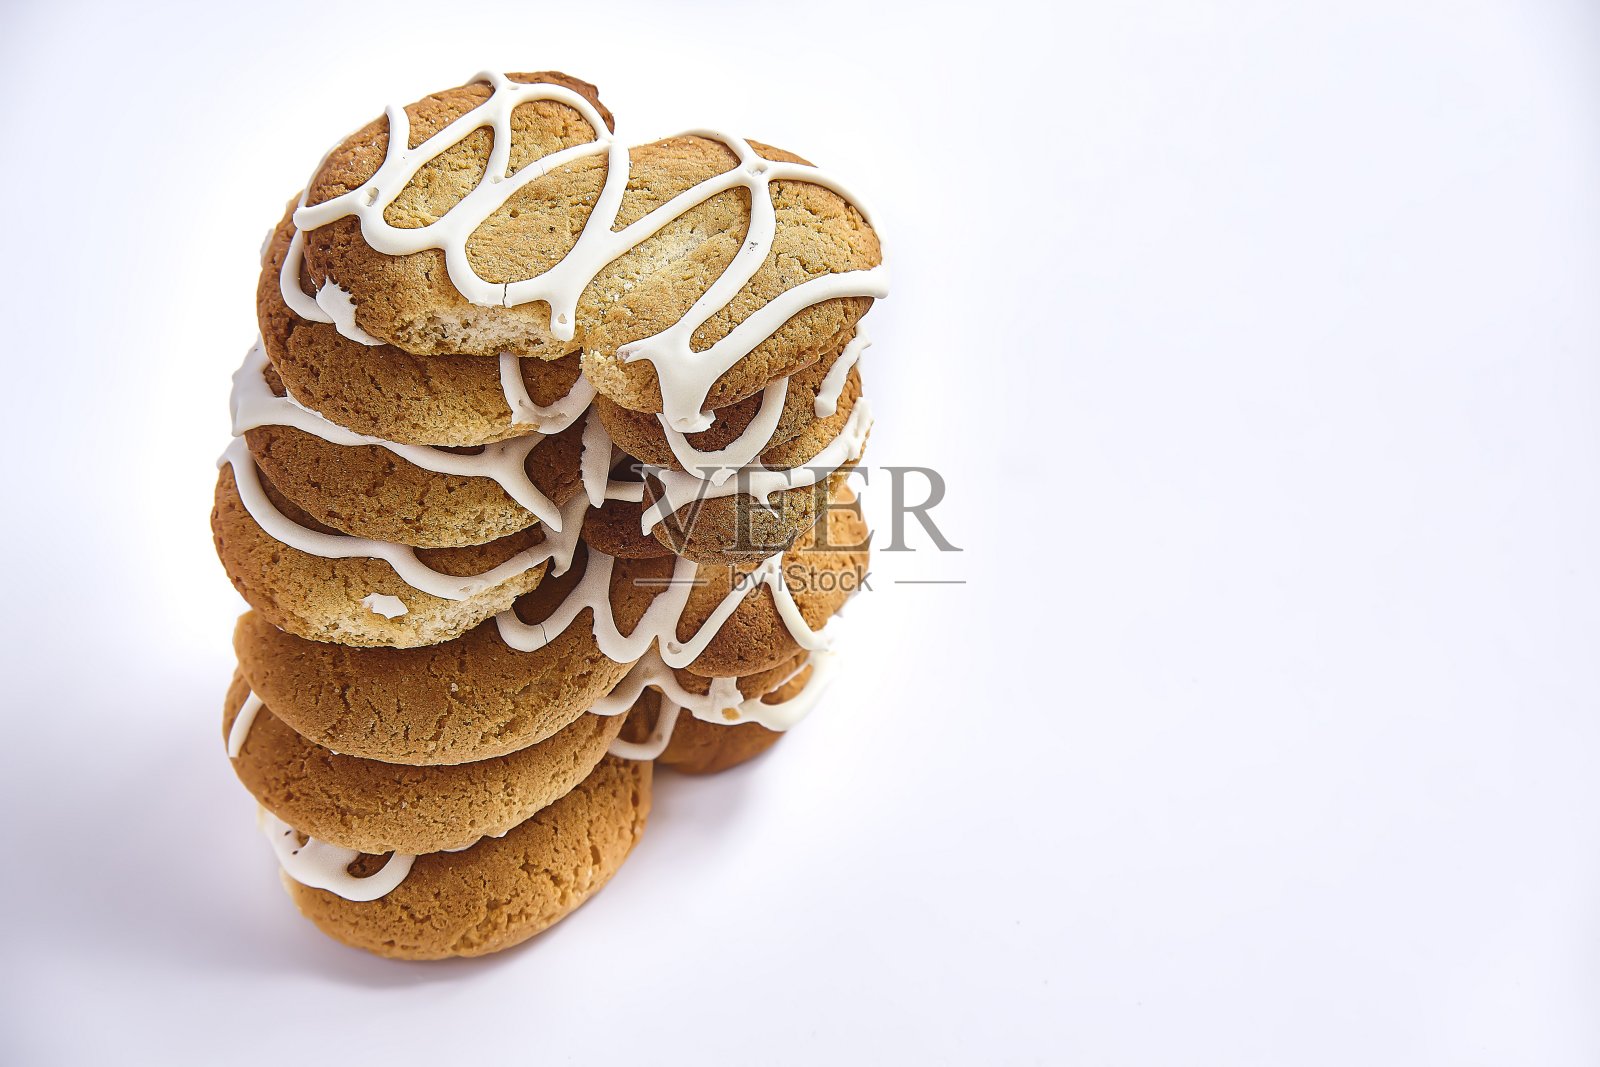 Stack of Cookies on white background(白色背景照片摄影图片